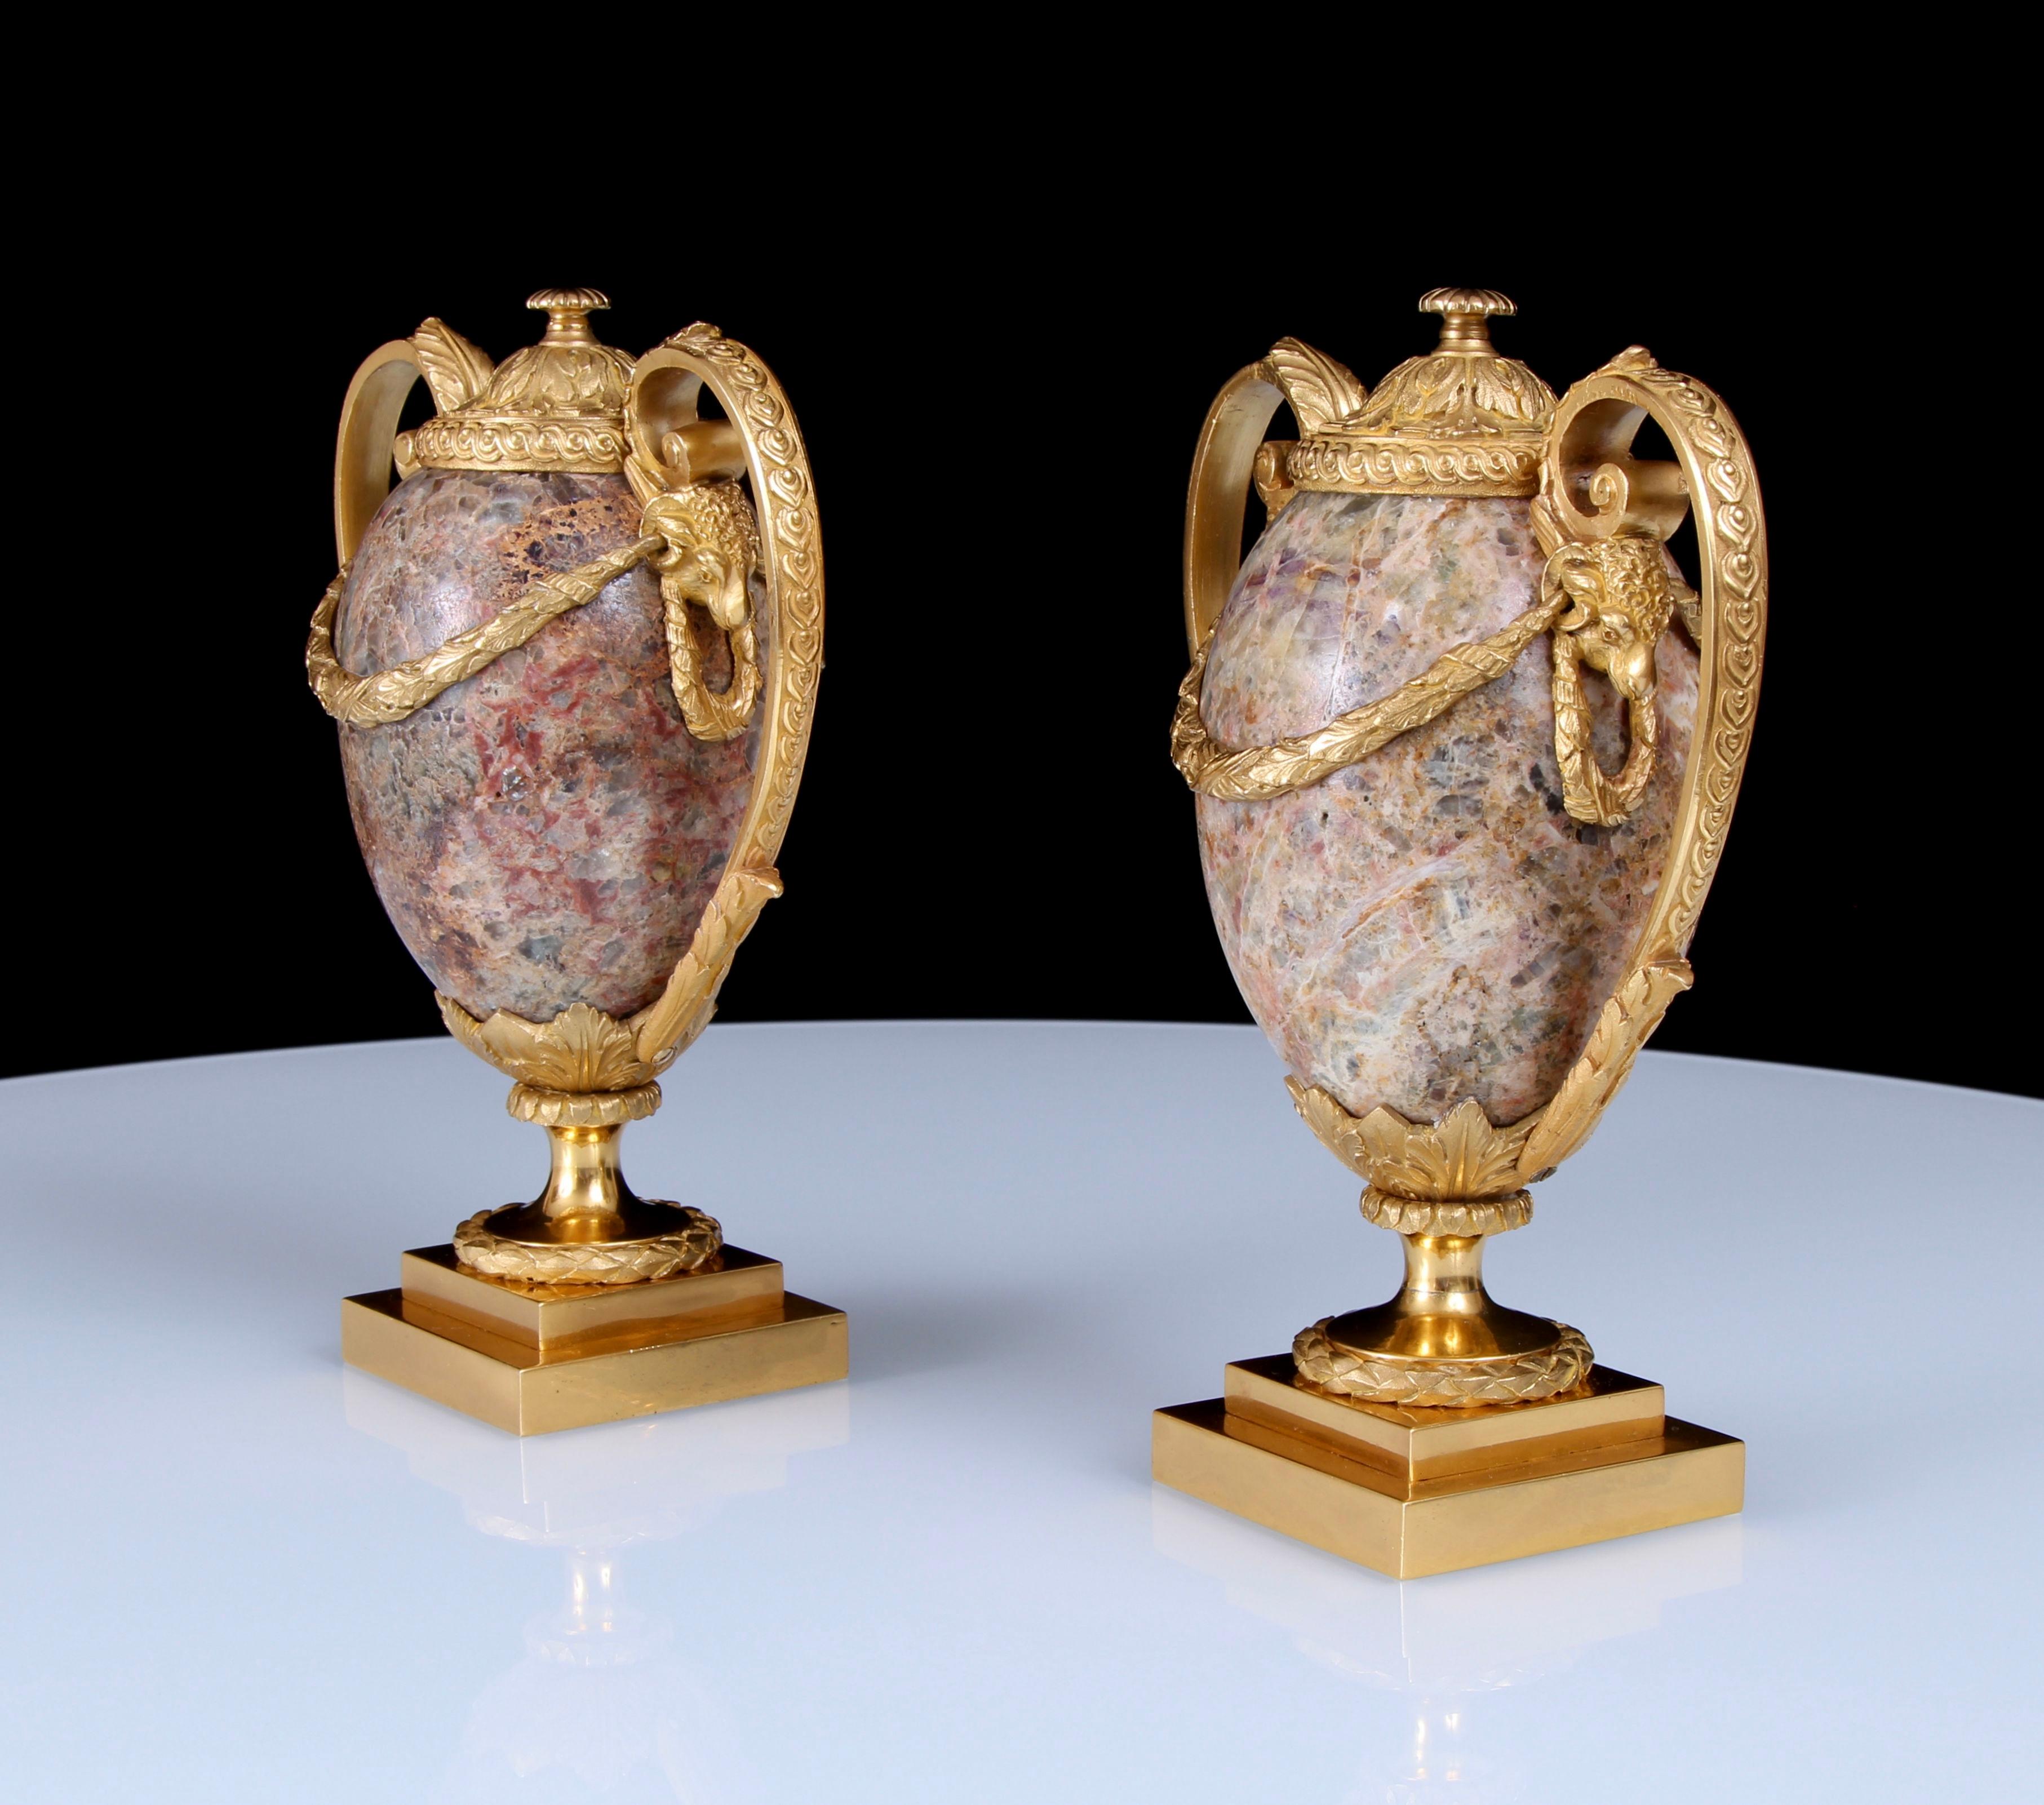 Pair George III Ormolu Fluorspar Cassolettes Attributed To Matthew Boulton In Good Condition In London, by appointment only